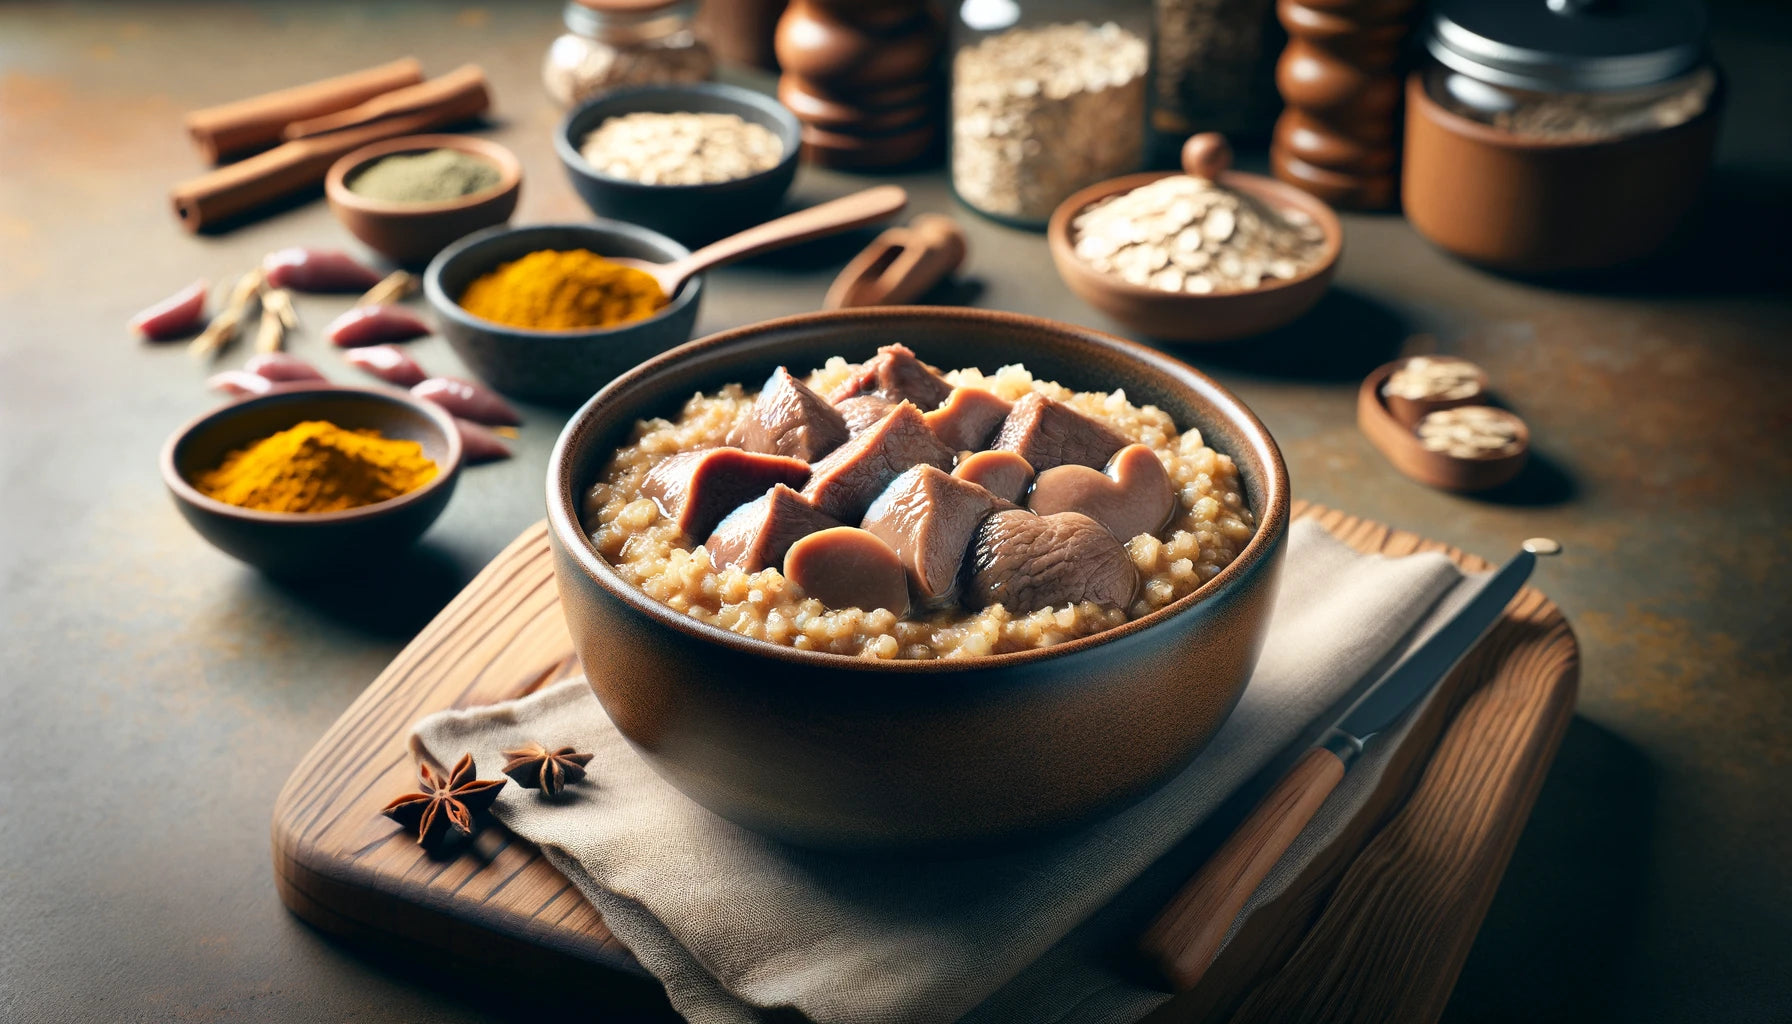 Chicken Liver Oats Porridge, a nutrient-dense and comforting meal for dogs.